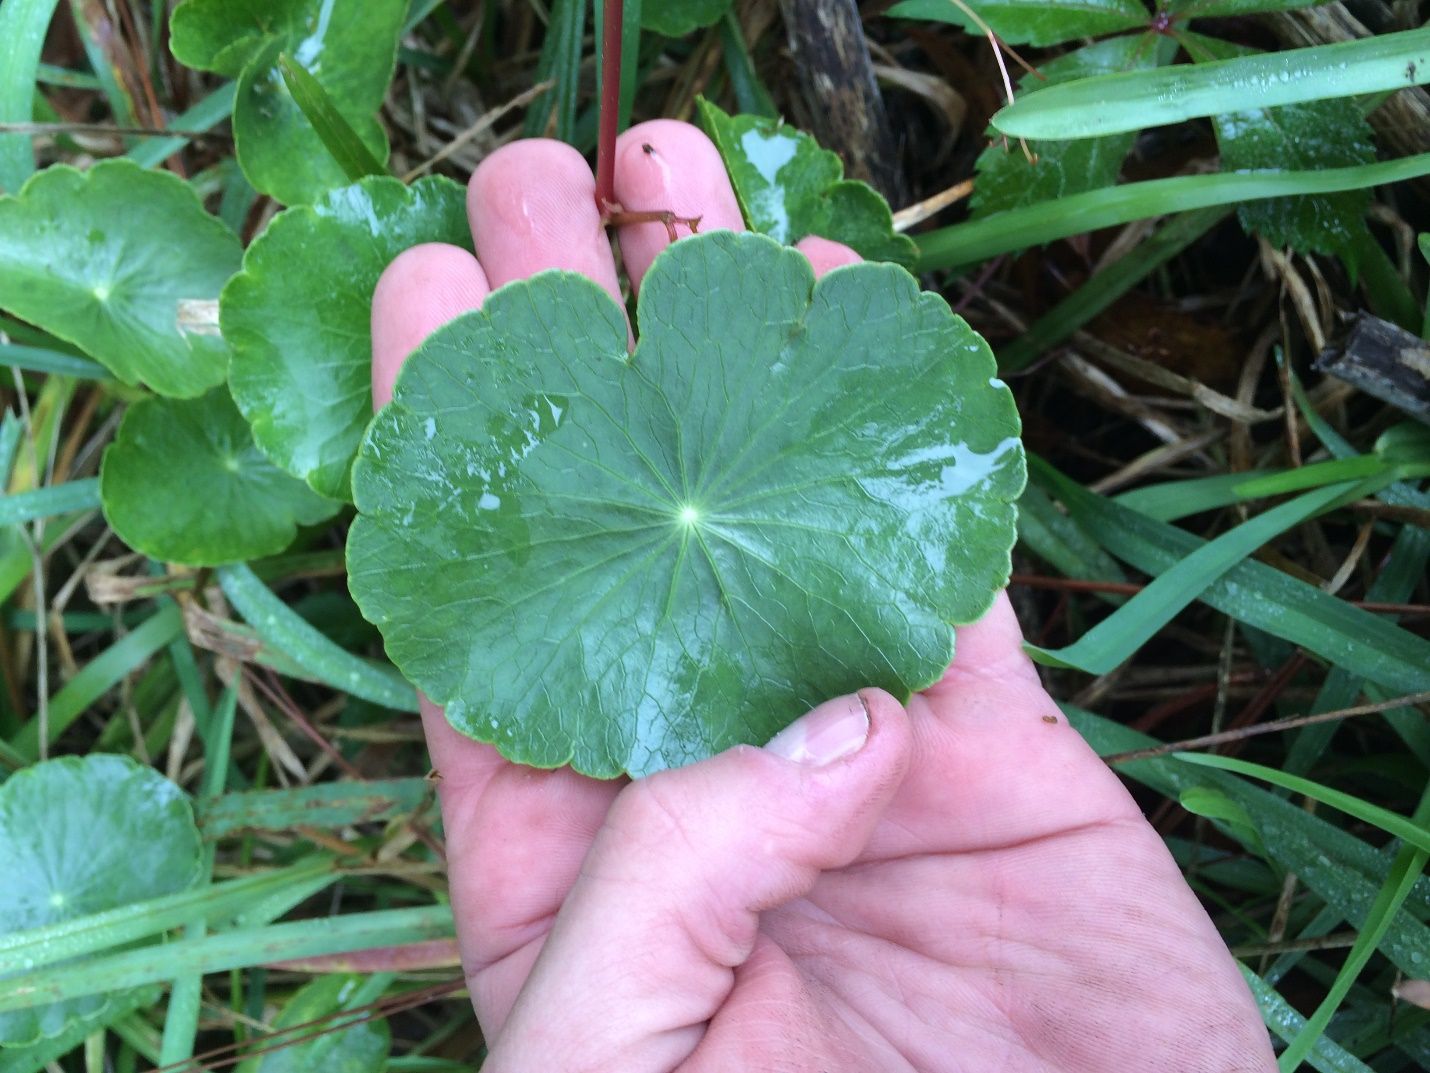 Dollarweed (Hydrocotyle spp.) is a reliable indicator of wet environments.